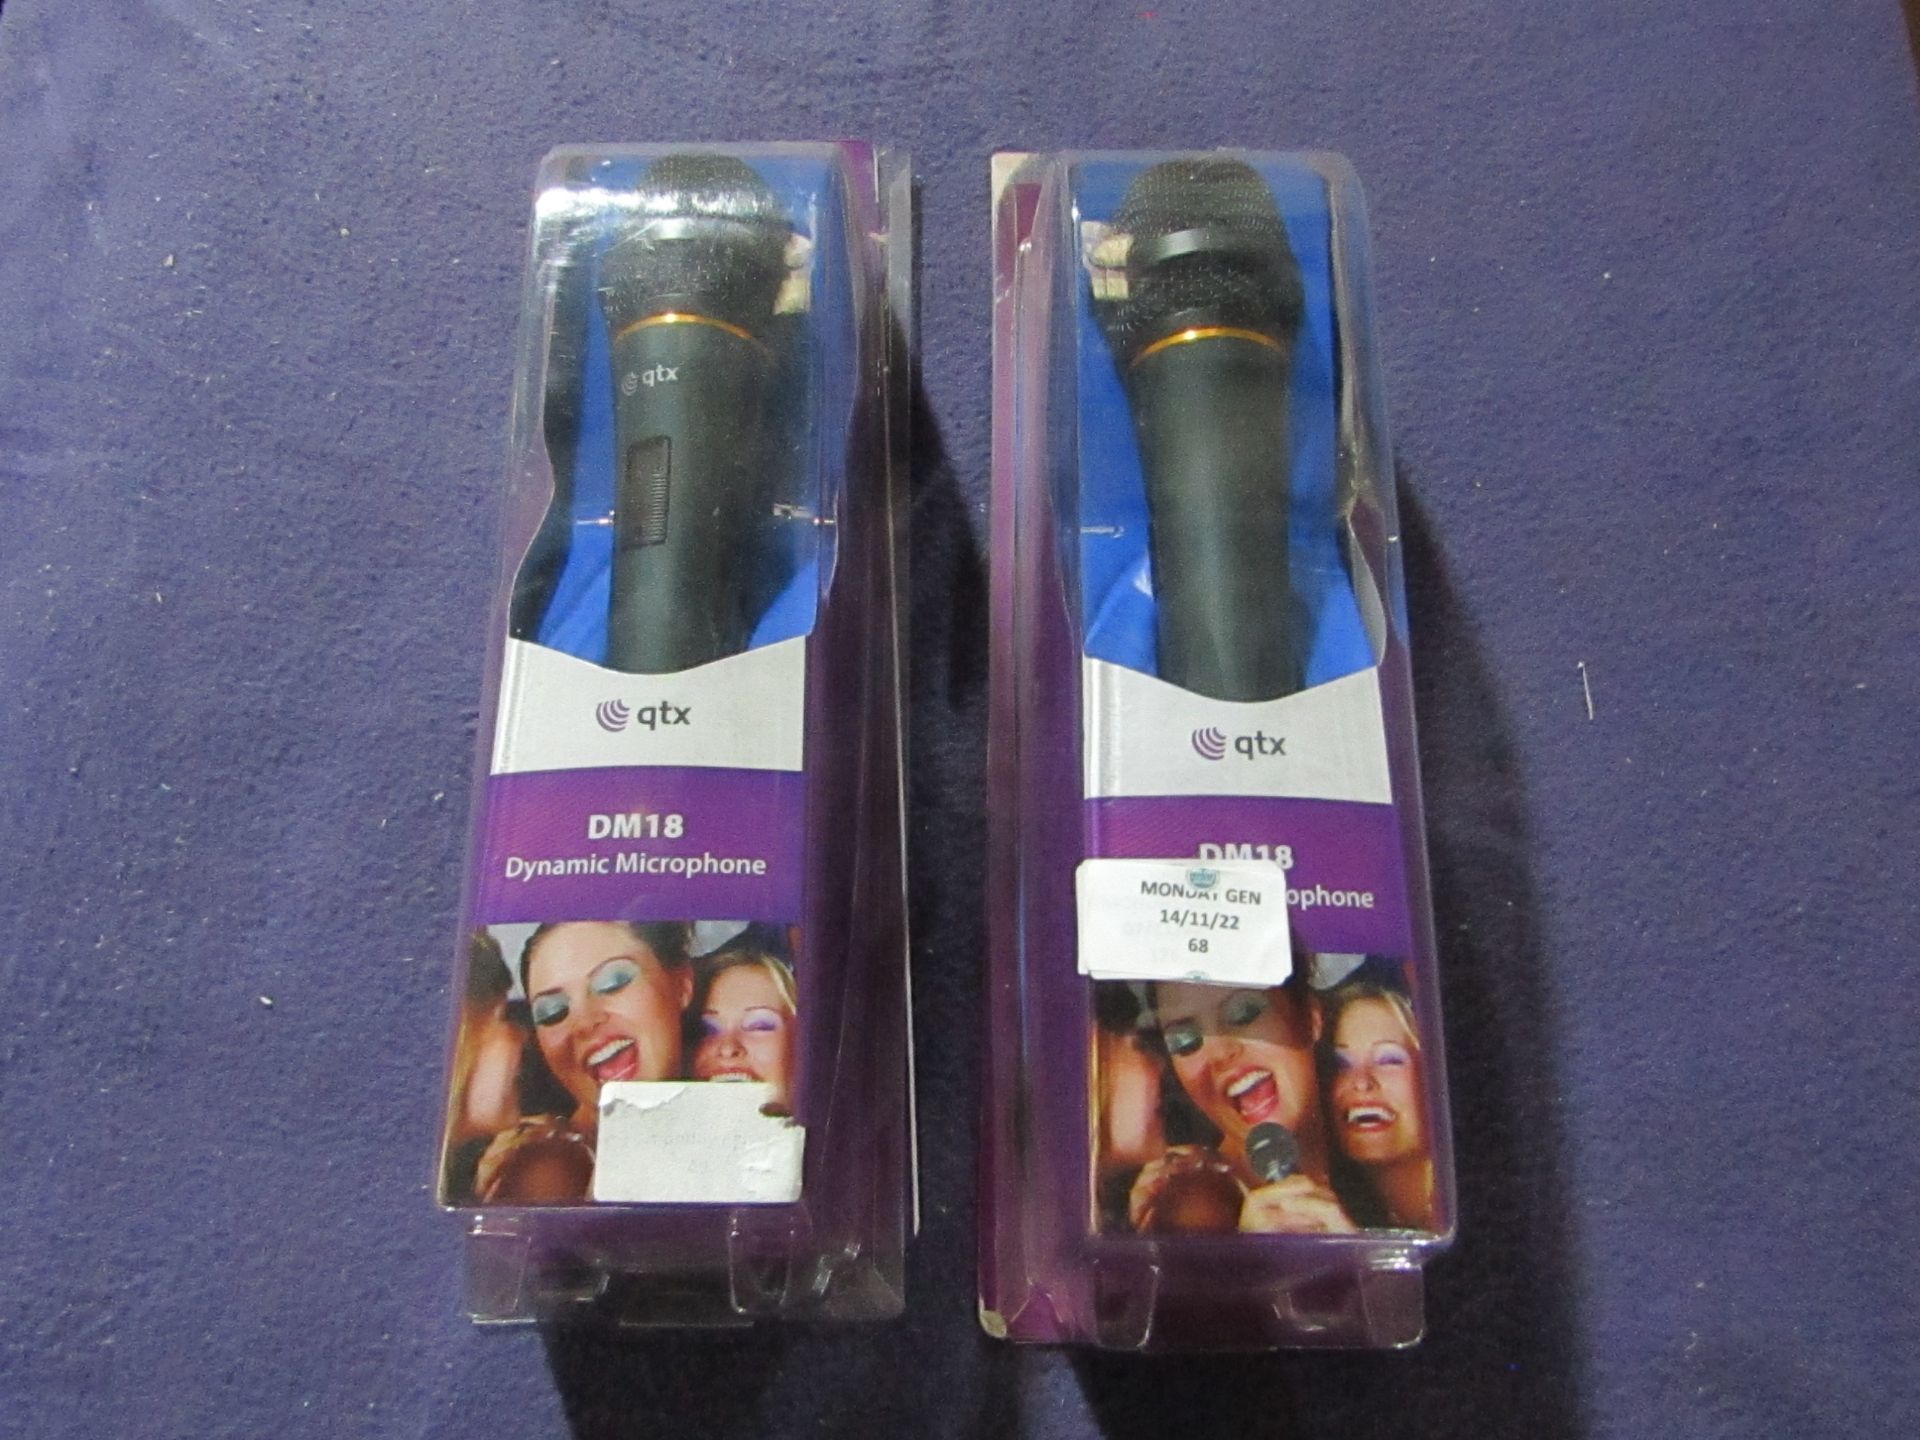 2x QTX - Dynamic Microphone ( DM18 ) - Good Condition, Packaging Damaged.